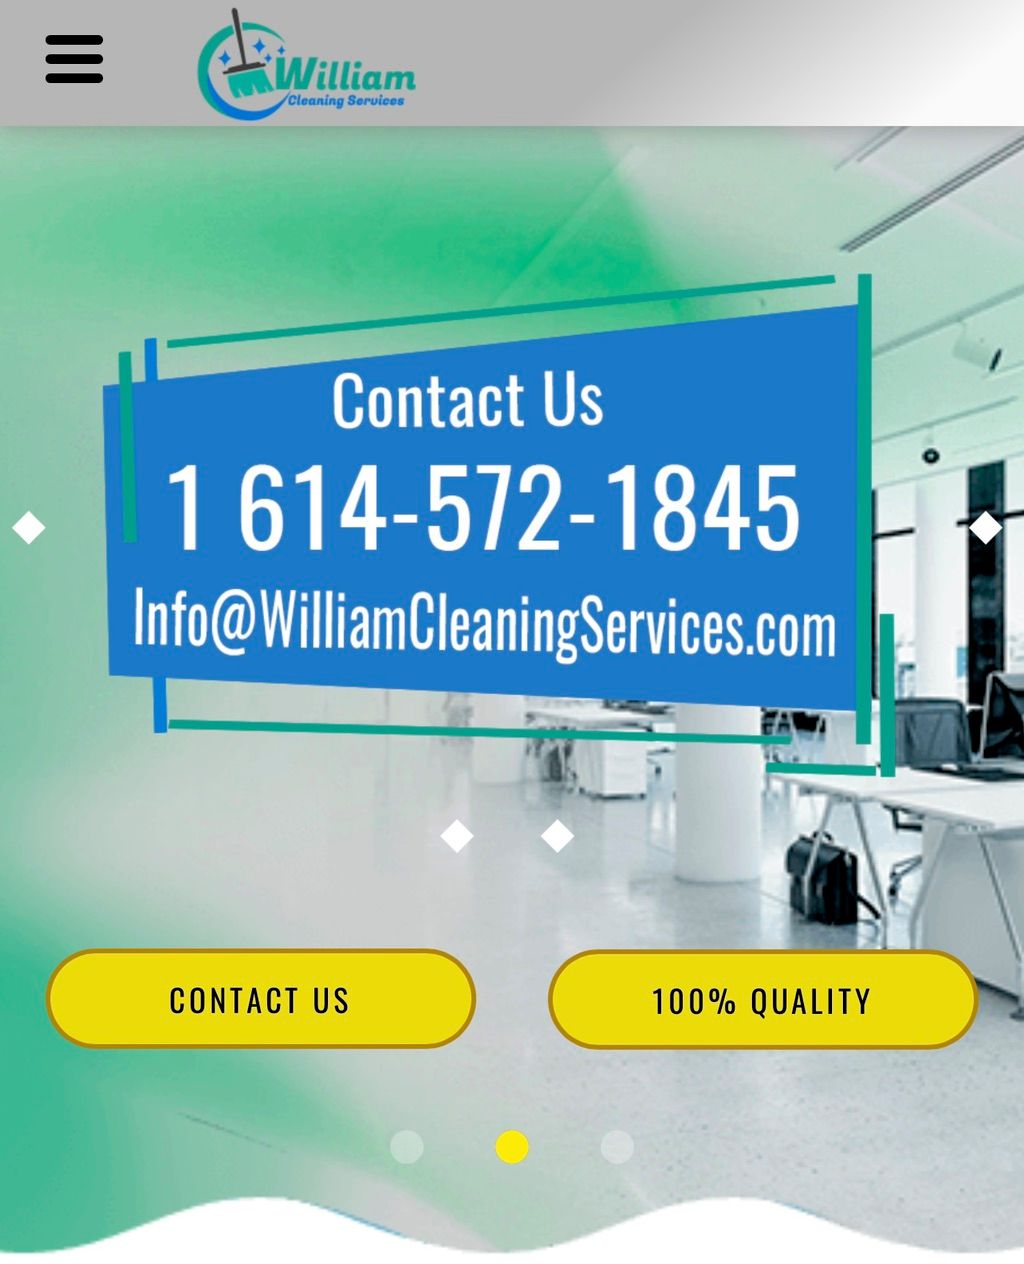 Willians pestana house cleaning service